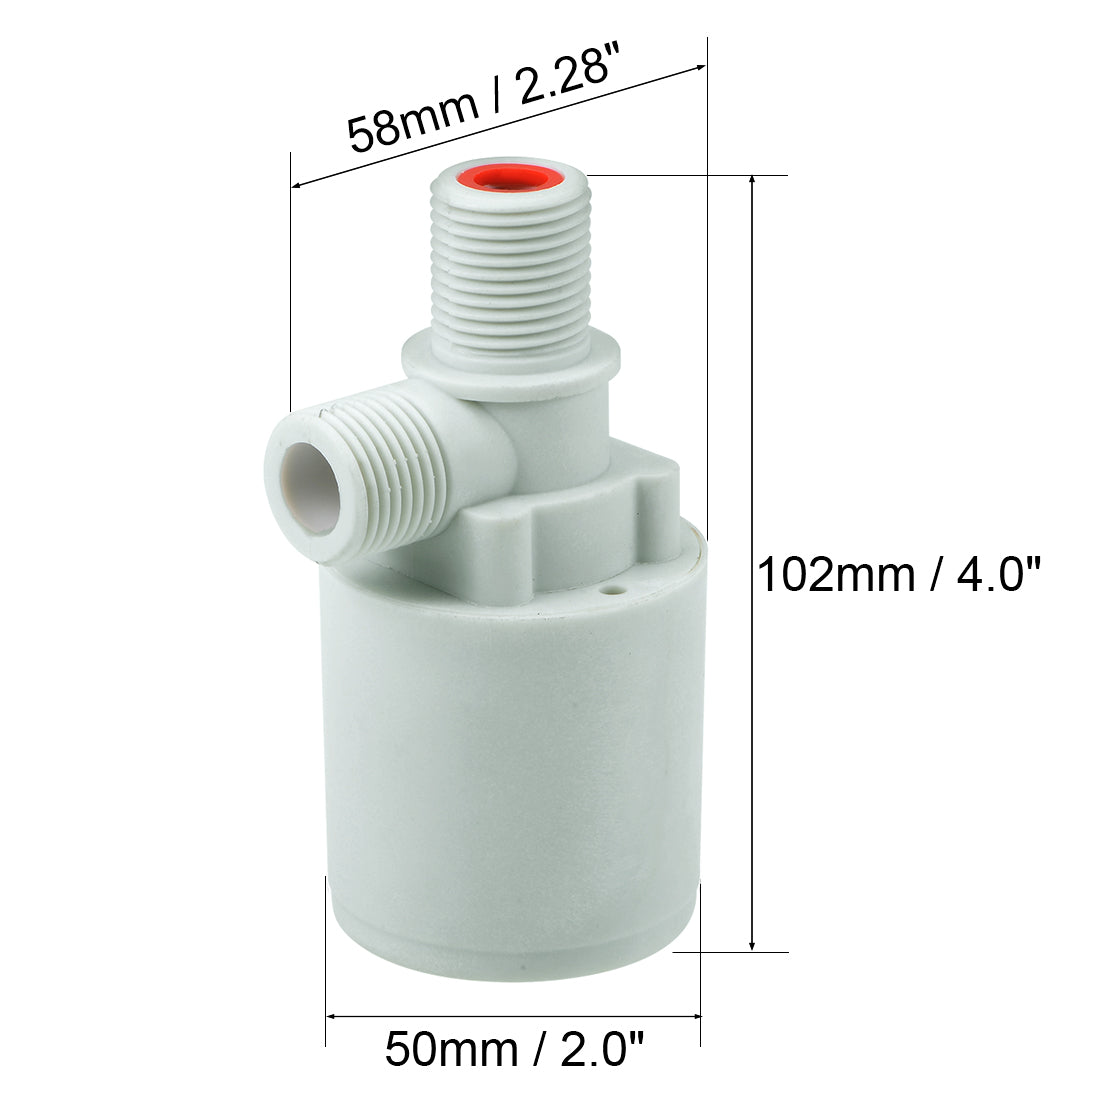 uxcell Uxcell Float Ball Valve G1/2 Thread Plastic Vertical Automatic Fill Water Liquid Level Control Sensor with Filter